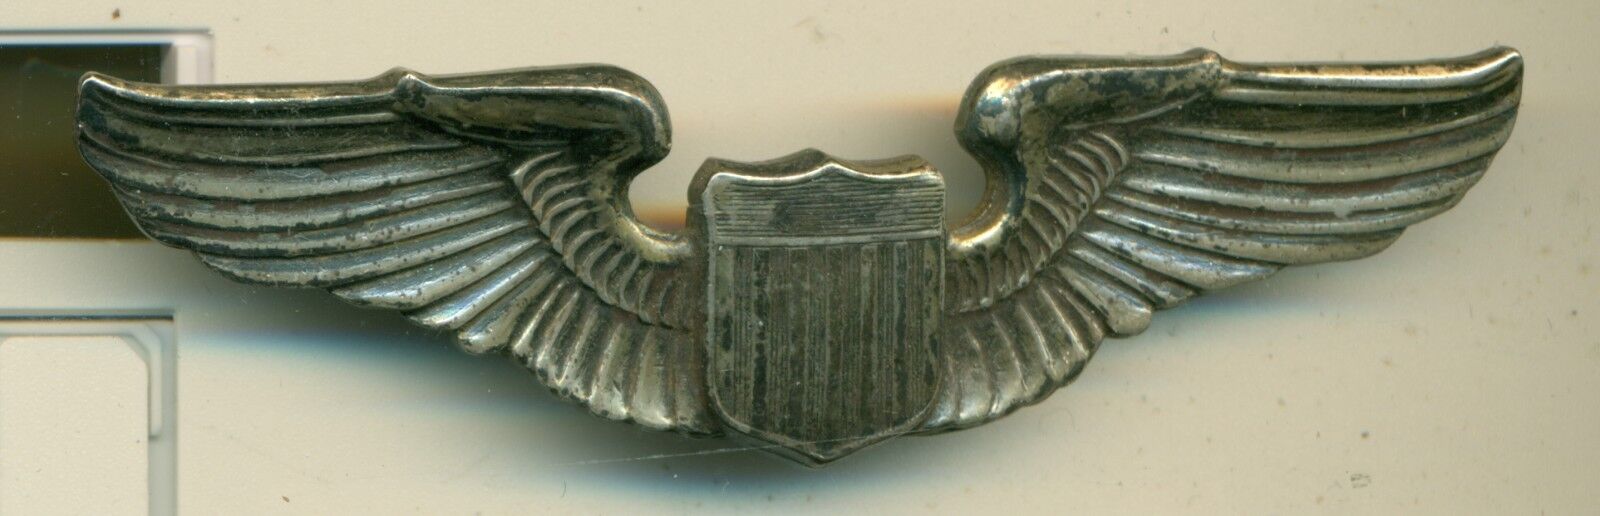 USAF Pilots WWII Wing Sterling Marked Clutch Pins Fully Original 1939-45 16.5gr